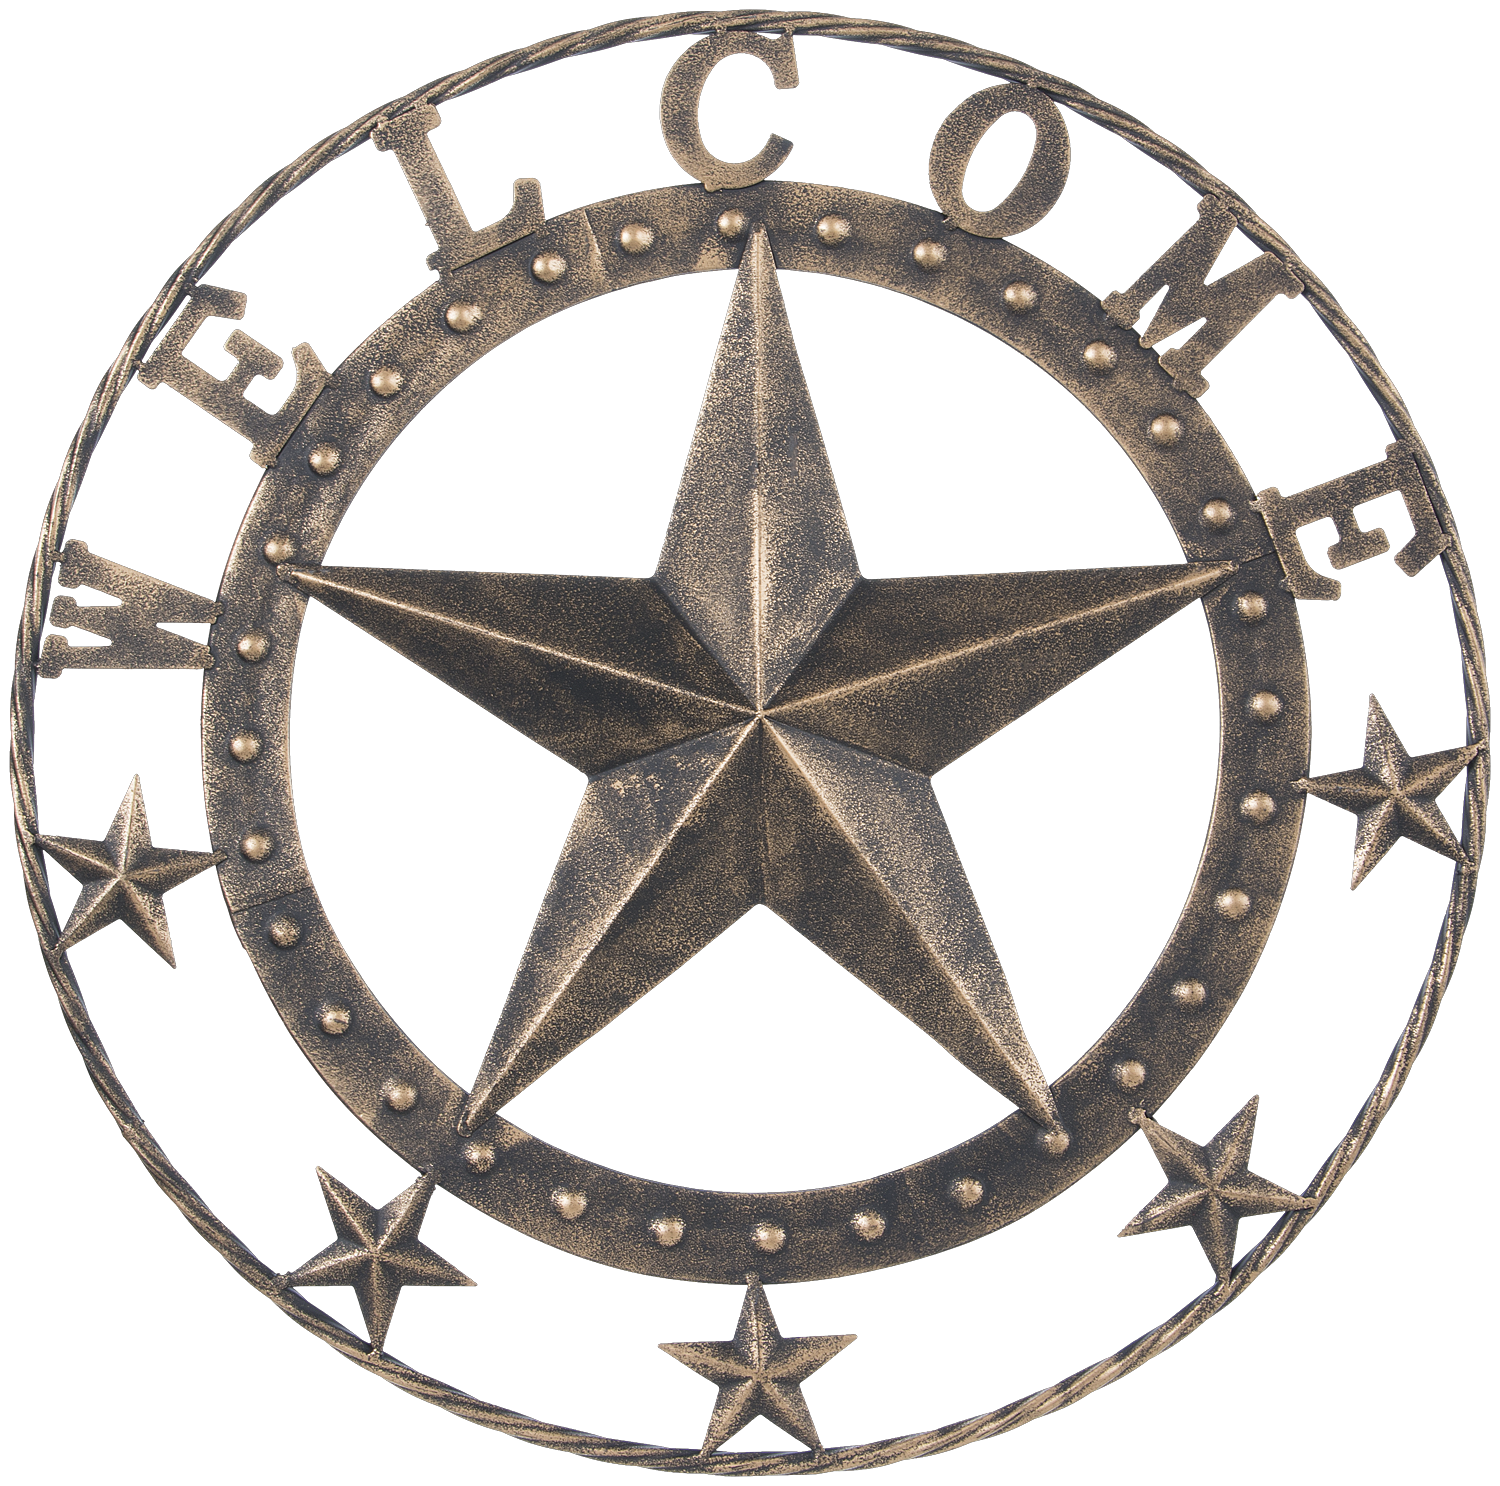 18 Metal Star Welcome Wall Plaque Wild West Living